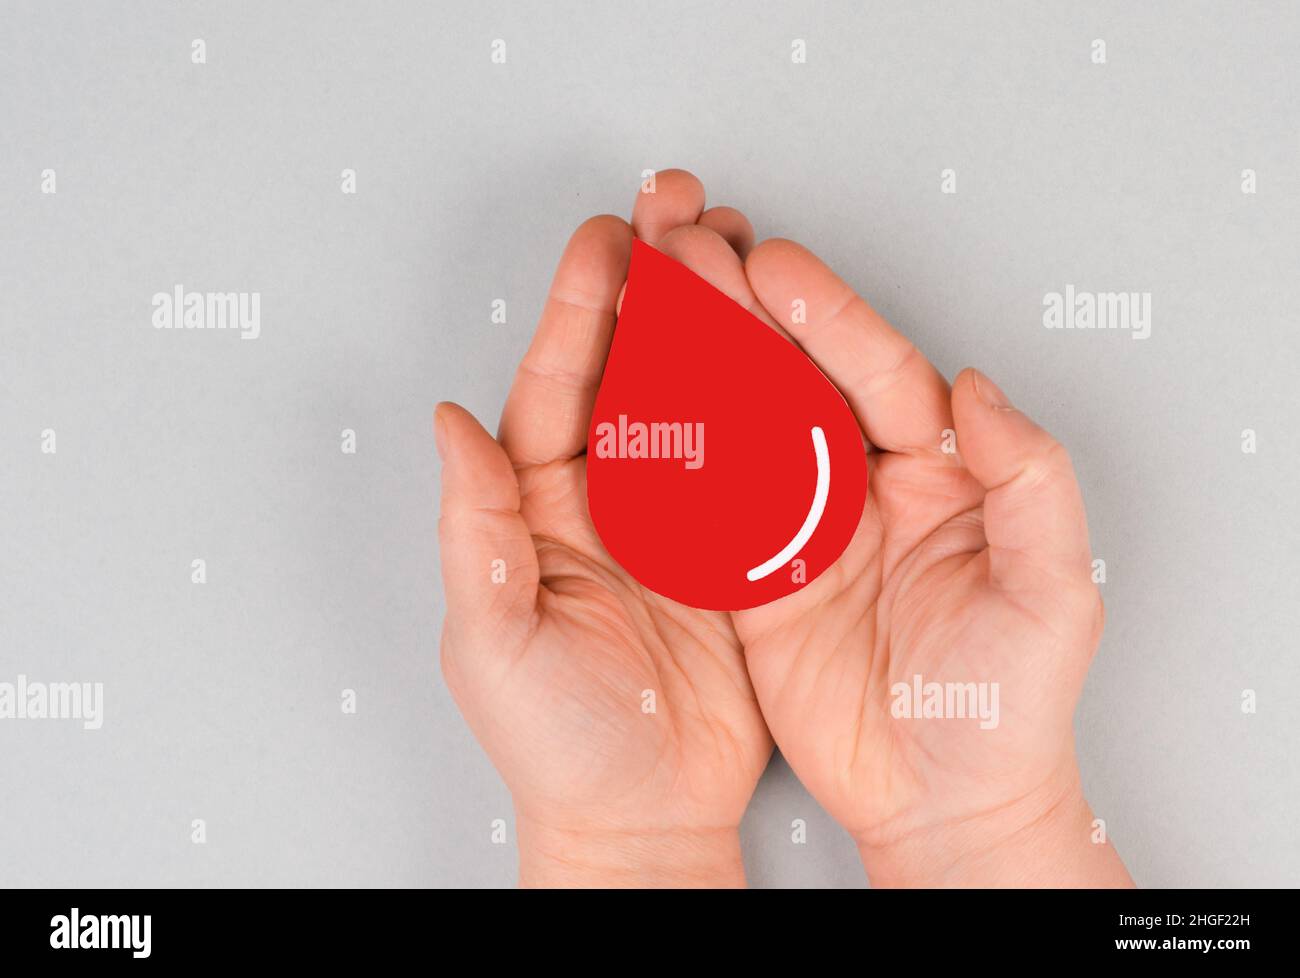 Holding a red drop in the hands, donate blood, world blood donor day, health care, transfusion Stock Photo